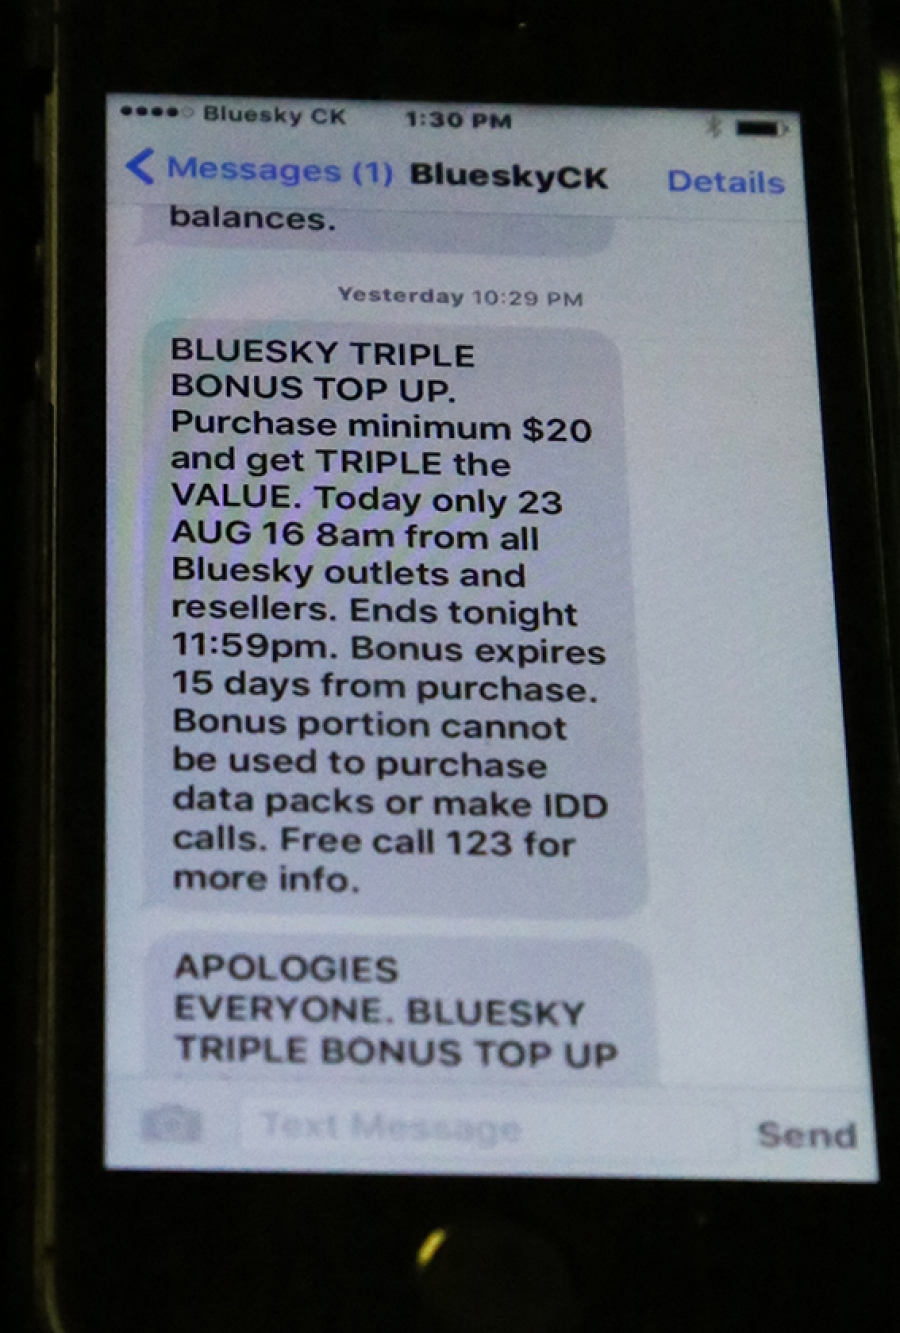 Late texts anger Bluesky customers